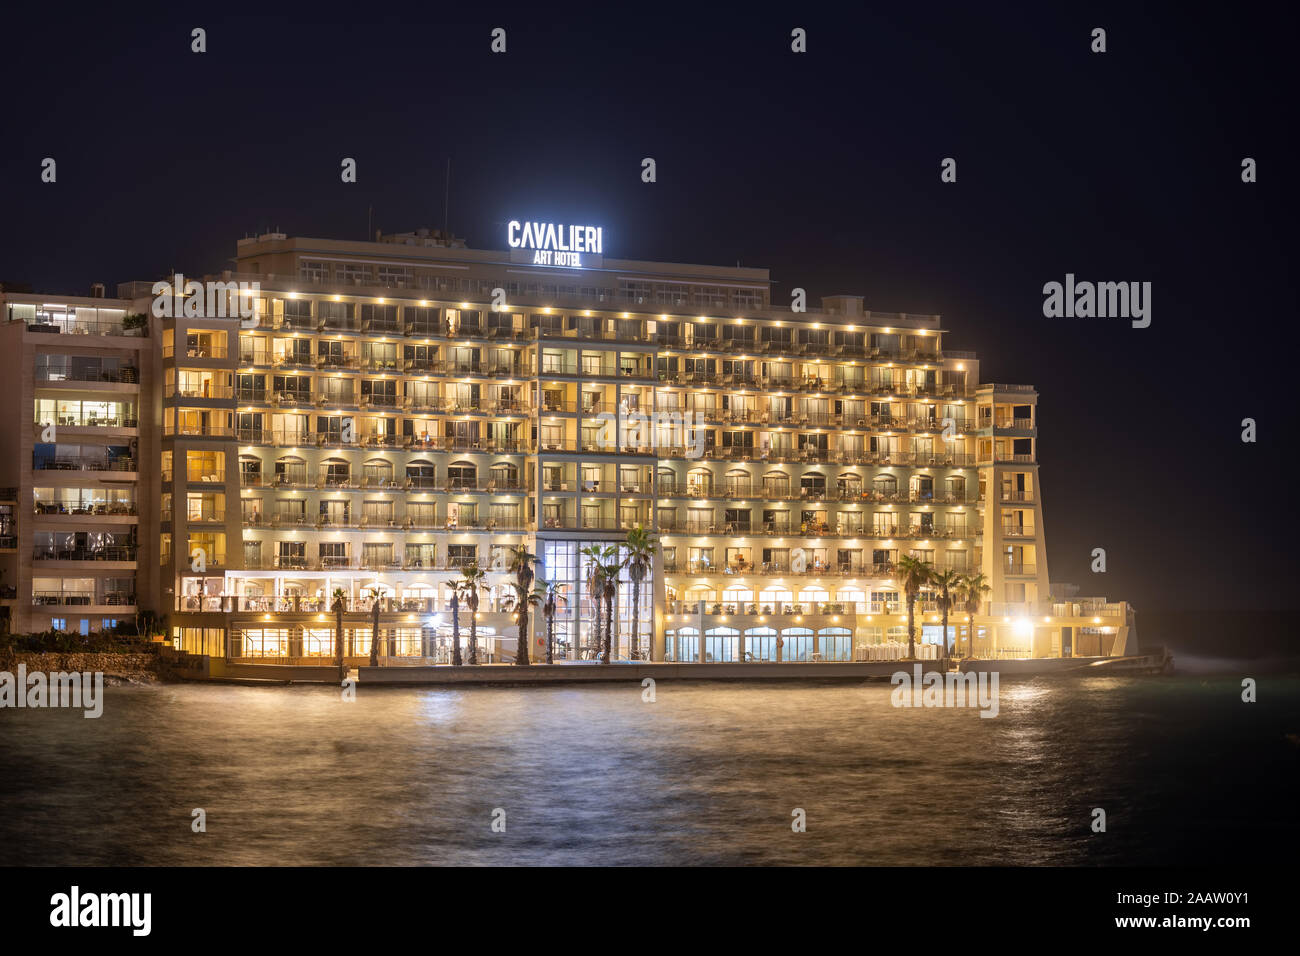 The Cavalieri Art Hotel at night in St. Julian town, Malta, four star accommodation with view to Balluta Bay Stock Photo